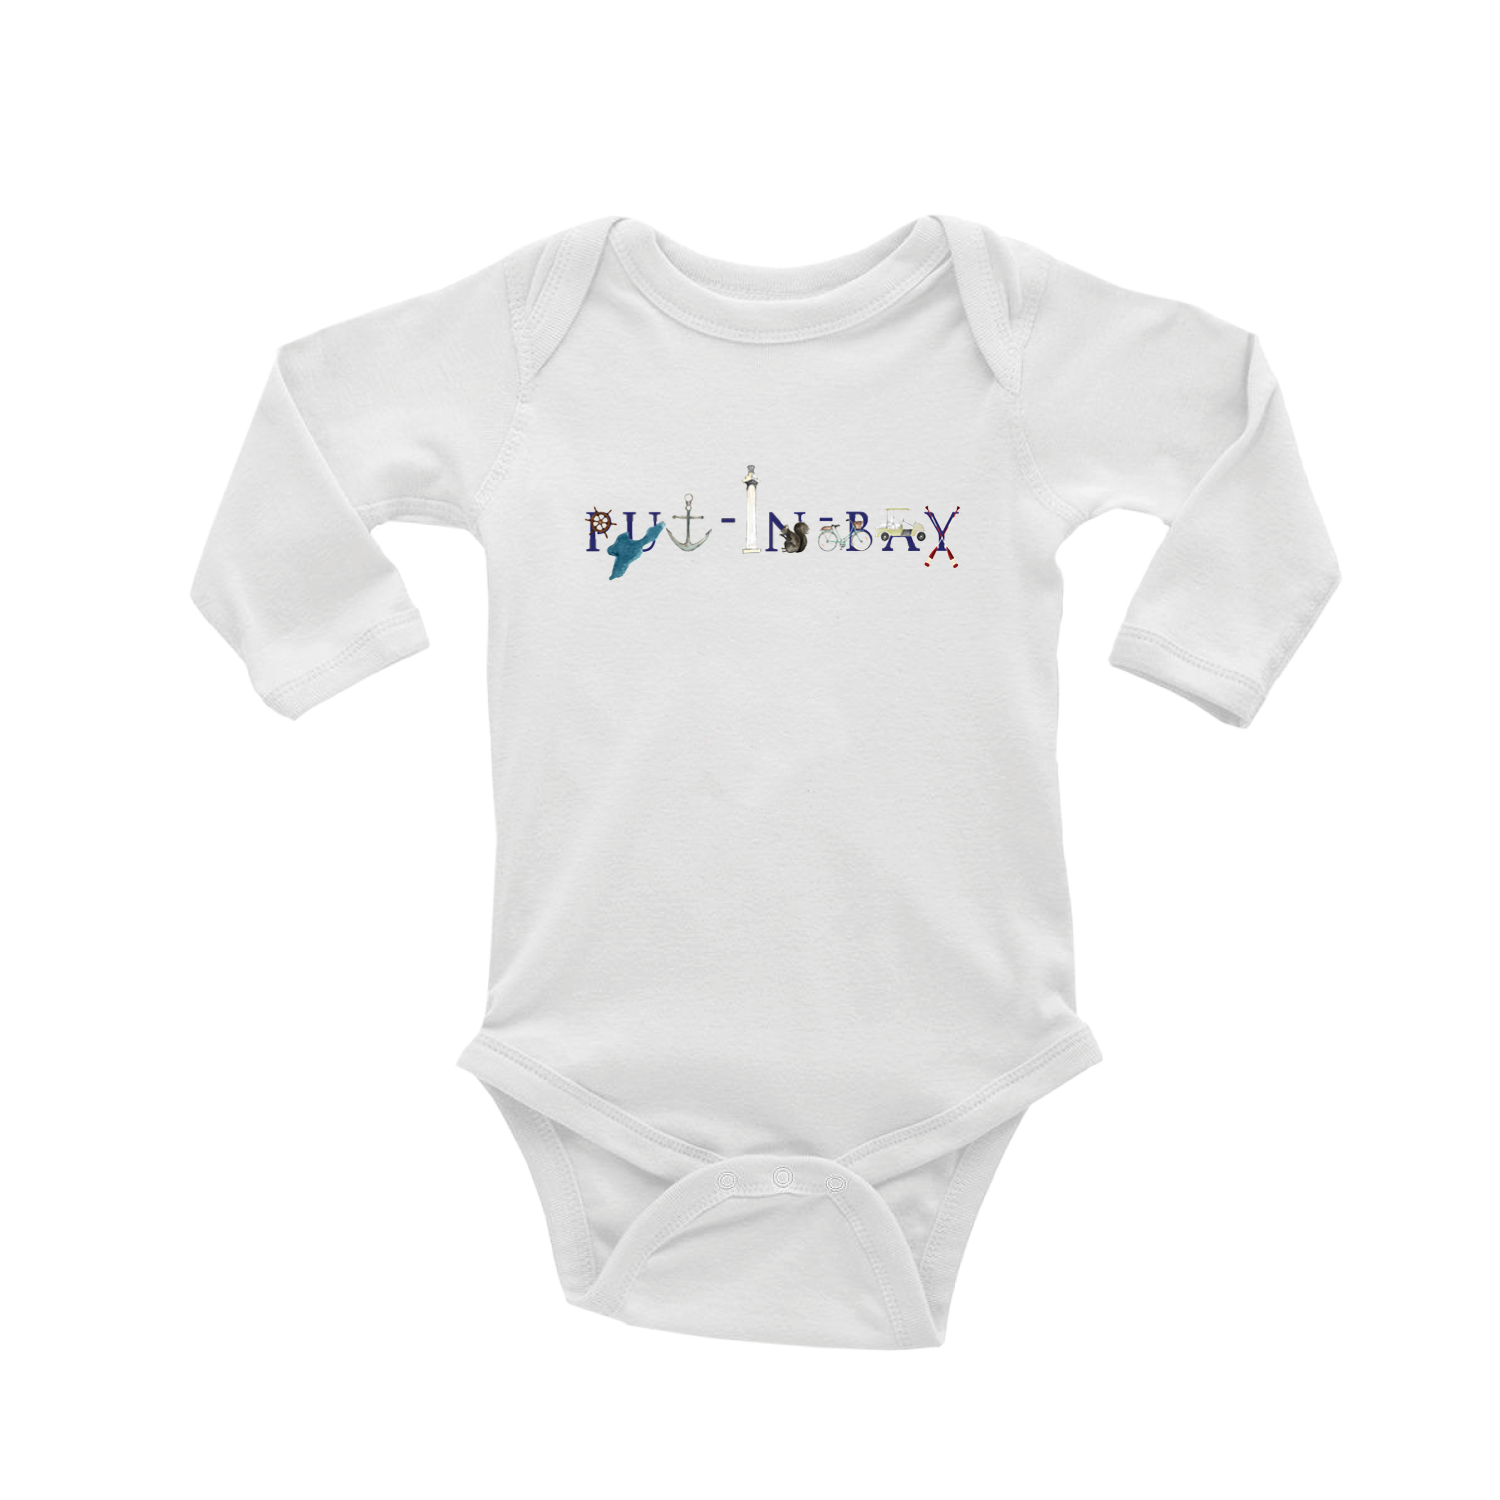 put-in-bay baby snap up long sleeve